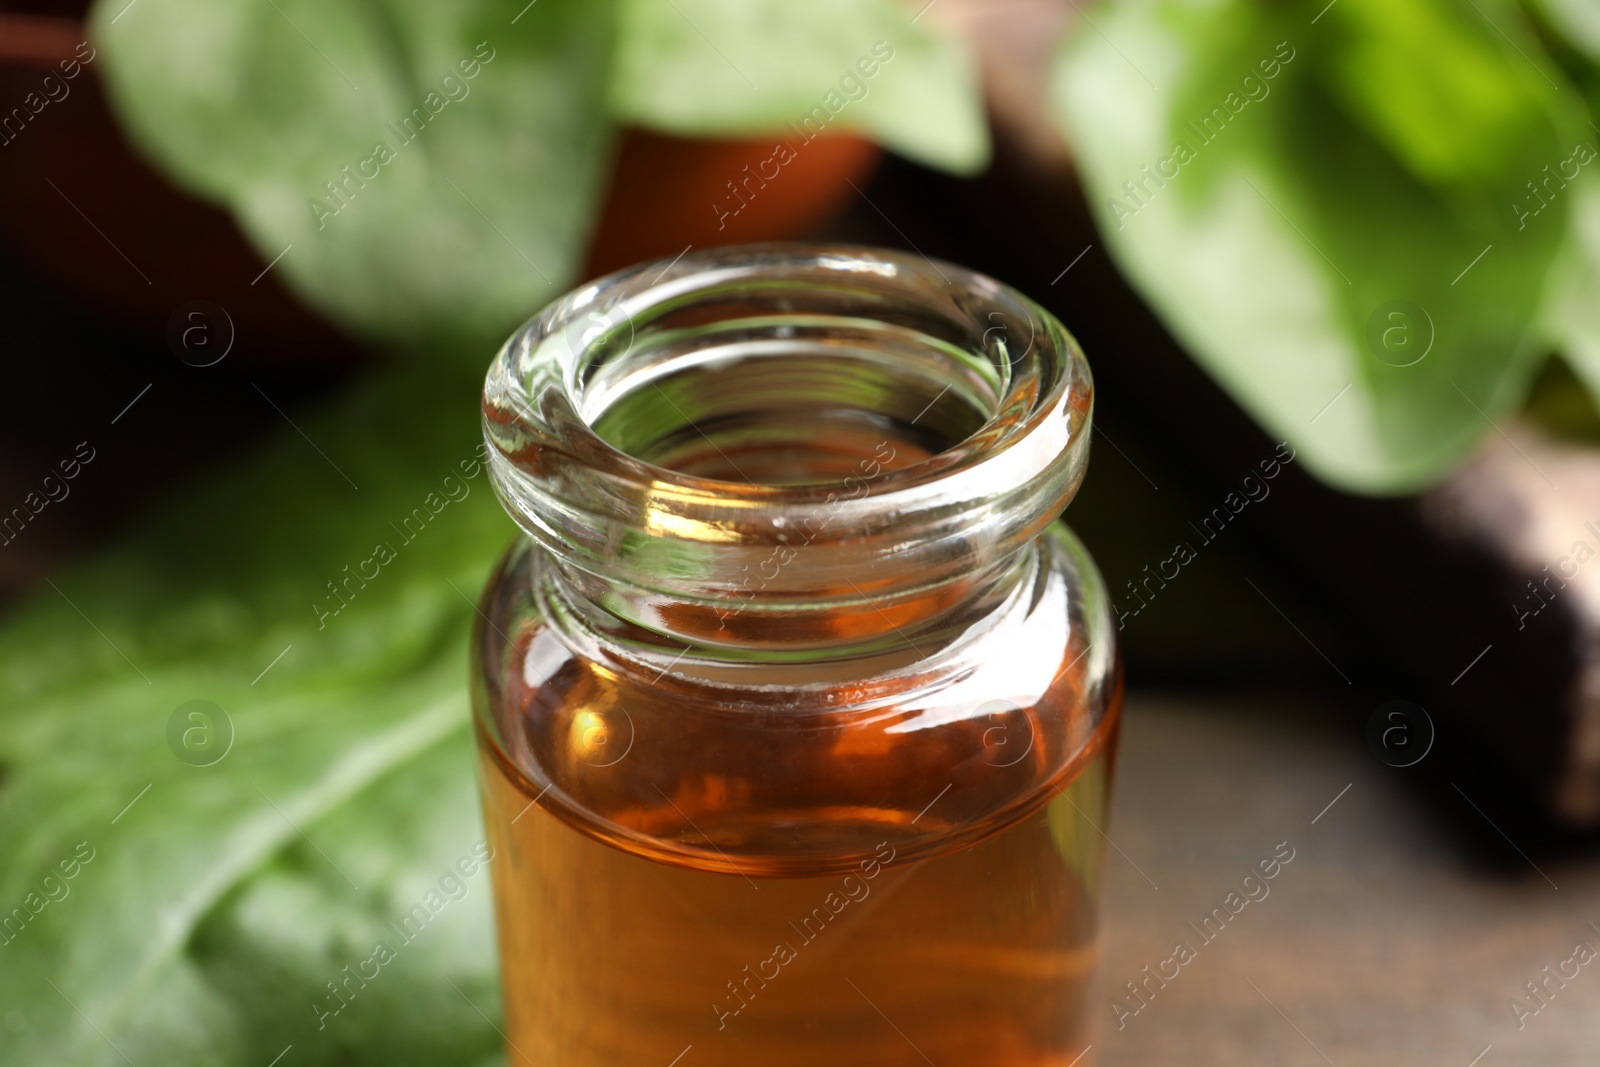 Photo of Bottle of broadleaf plantain extract, closeup view